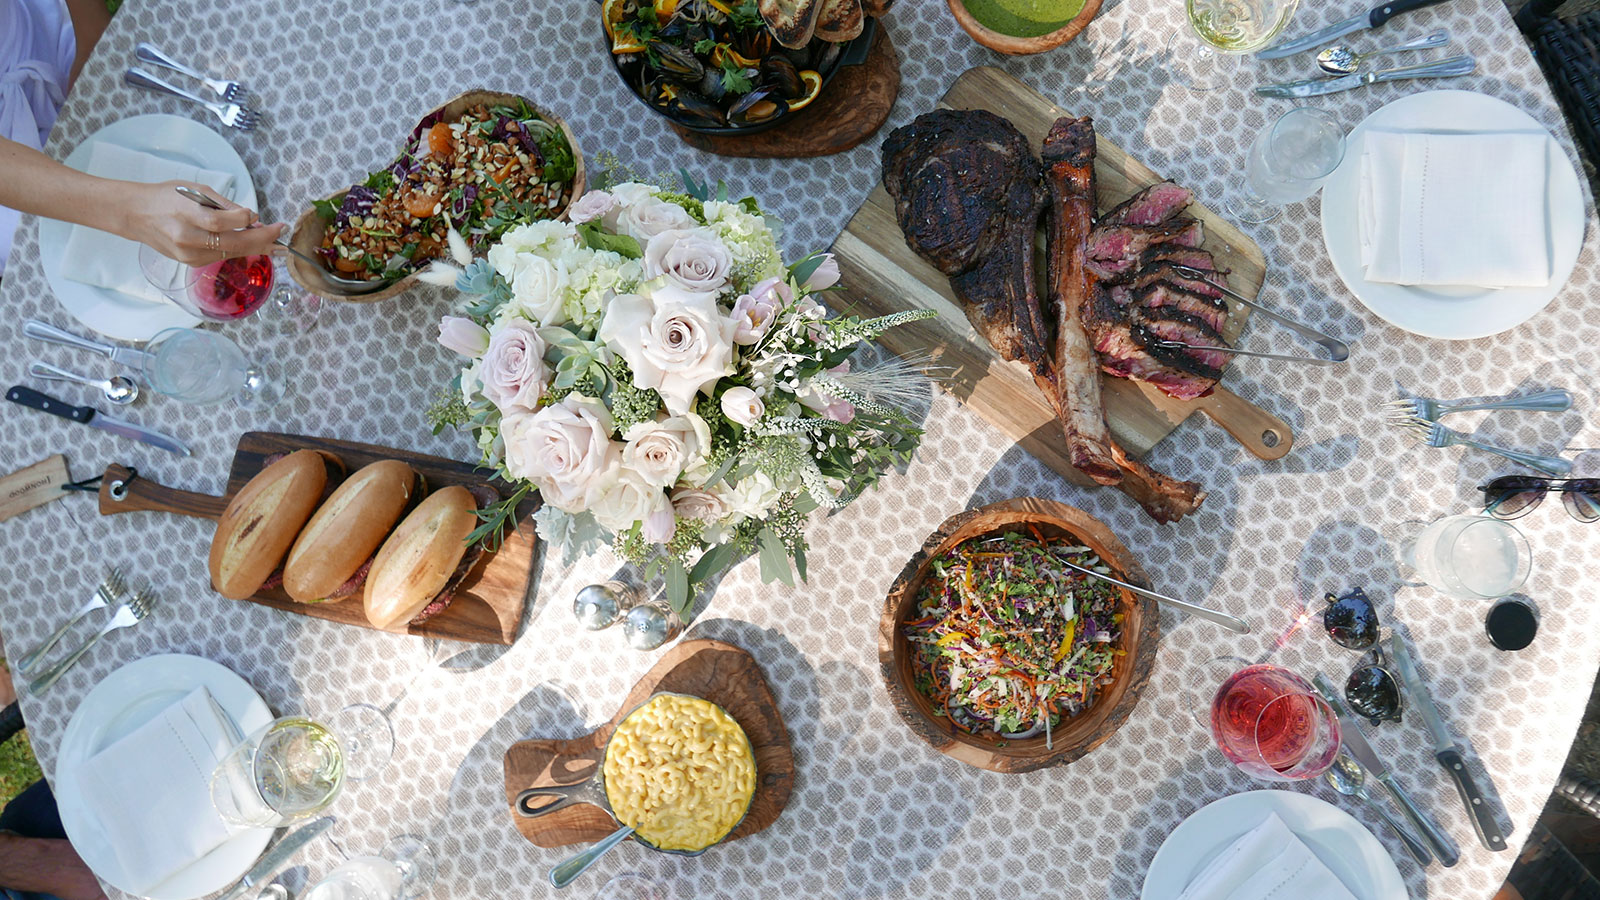 Taste the barbecue of the resort’s famous California Ranch Cookouts, which captures the essence of California cuisine with the depth of flavor and heartiness of Western ranch cooking.